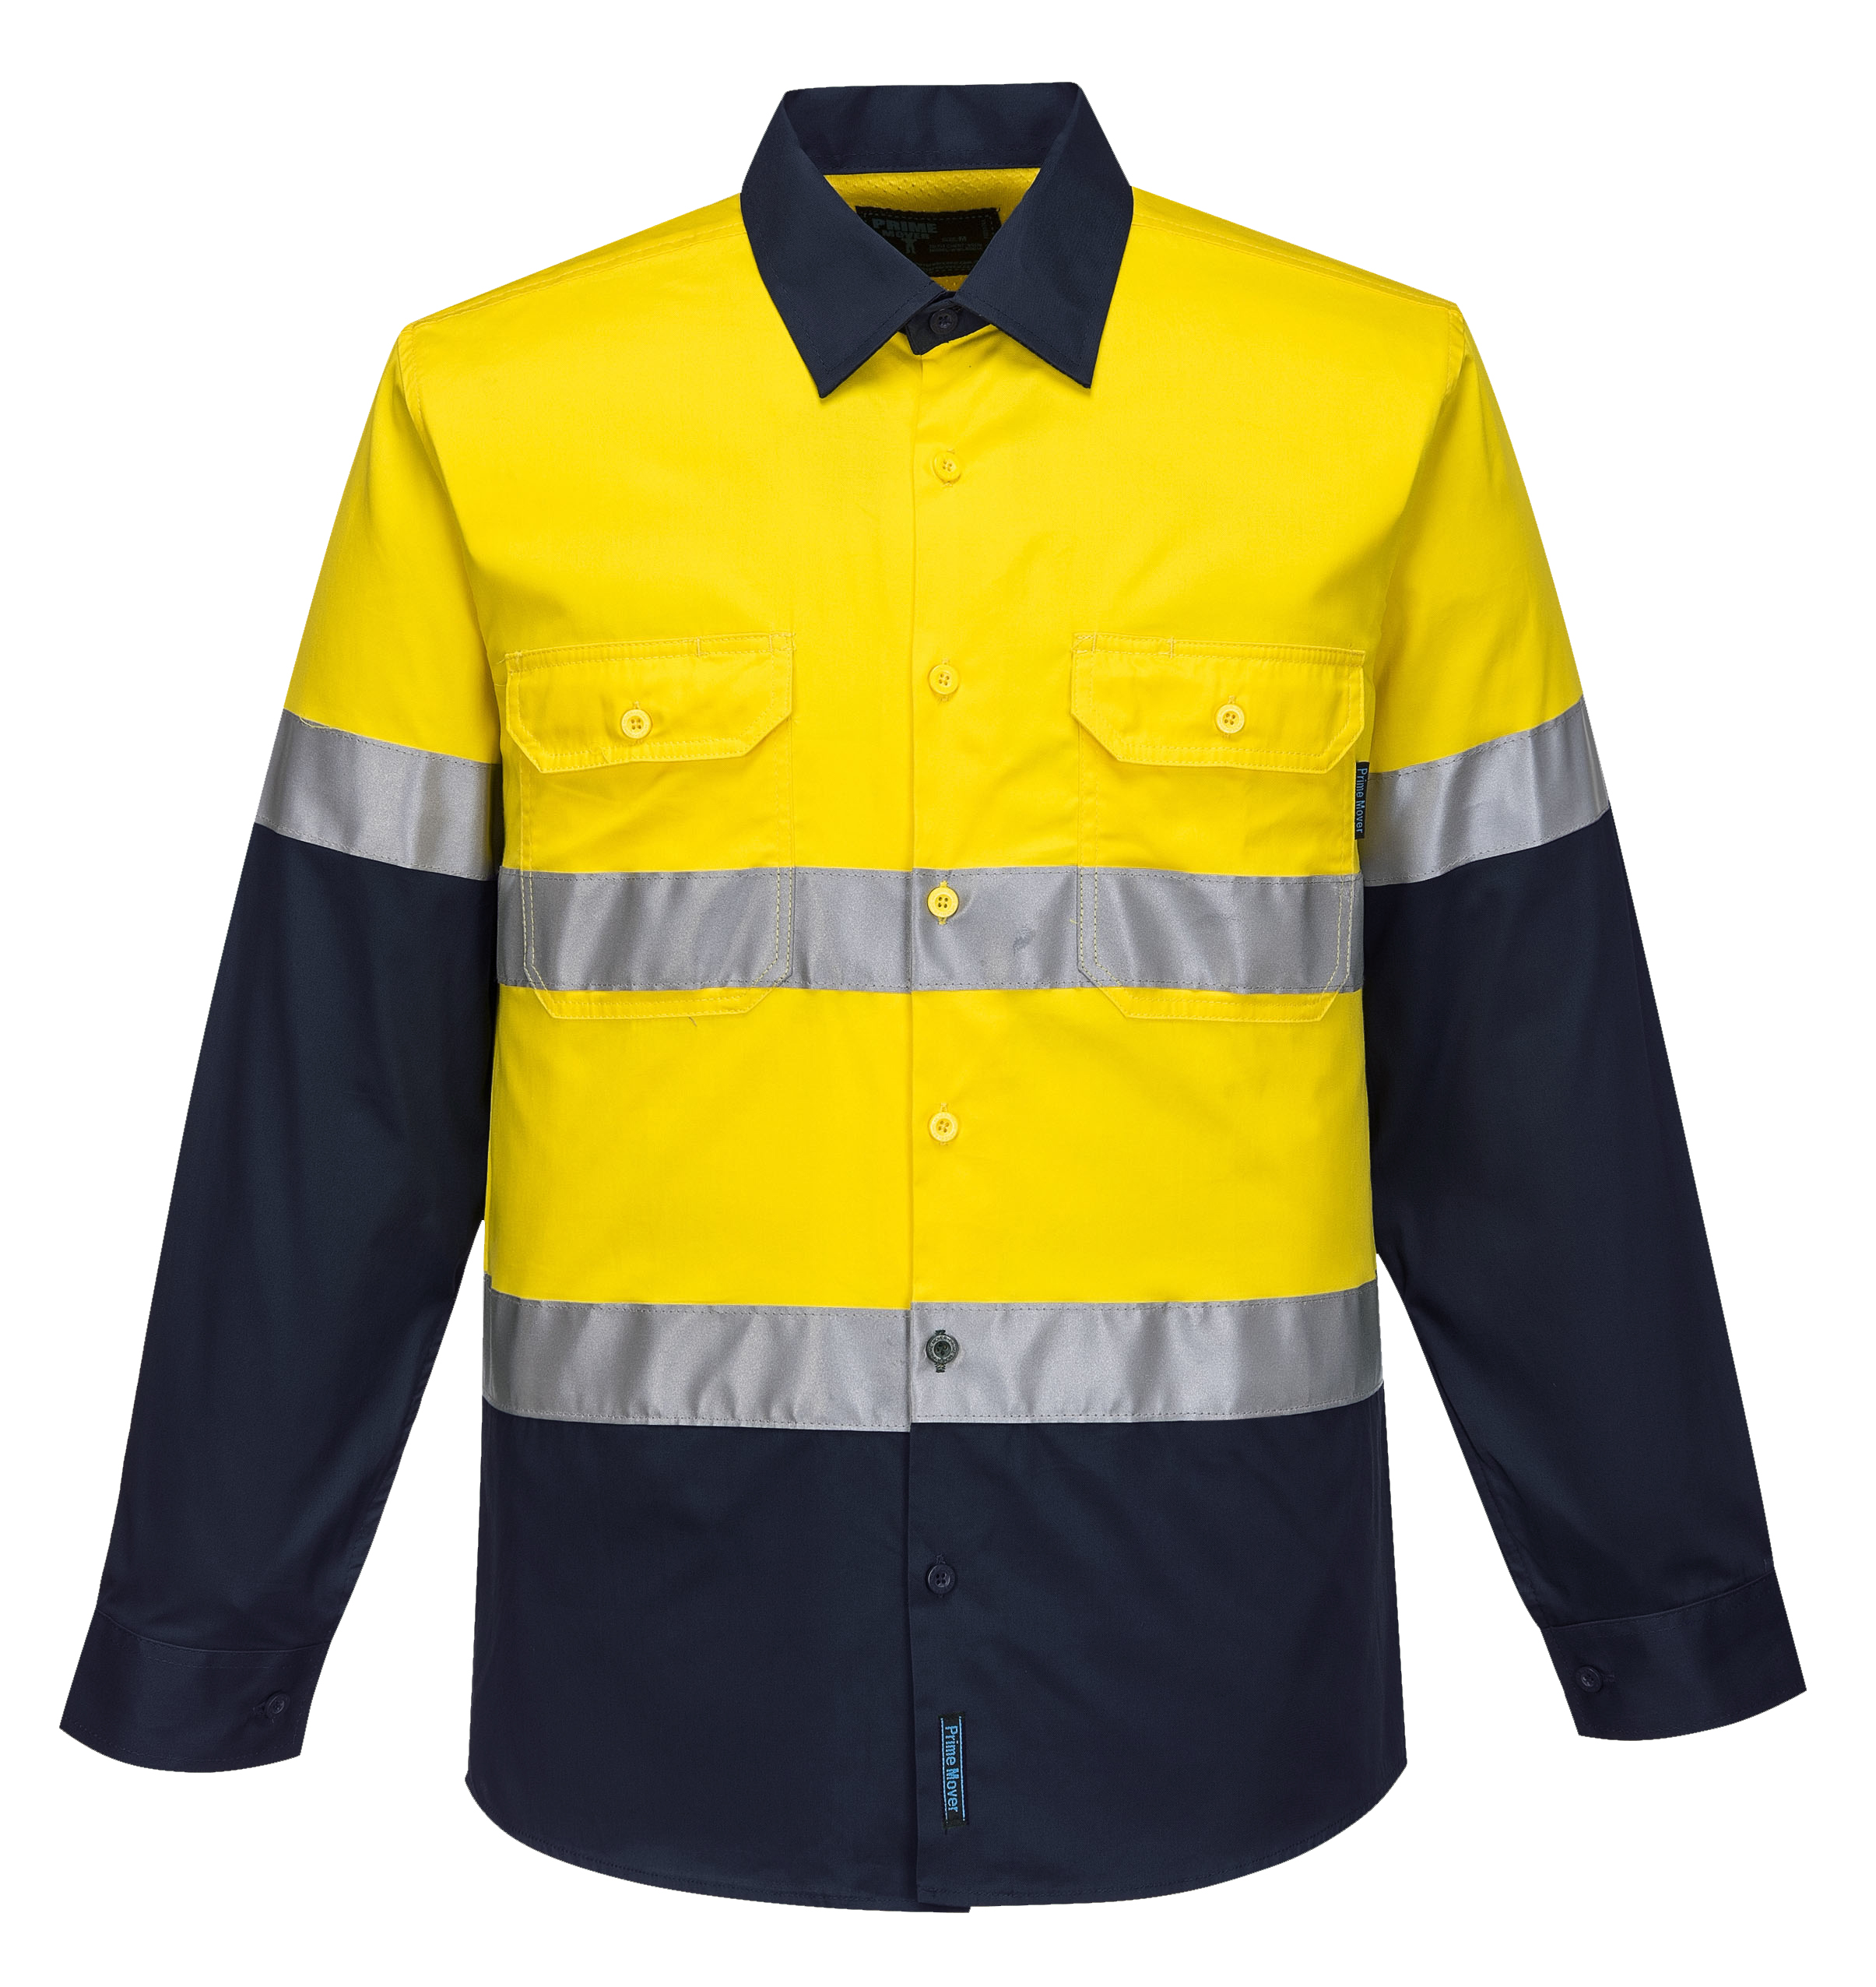 MA801 - Hi-Vis Two Tone Cotton Lightweight Long Sleeve Shirt with Tape NVY1